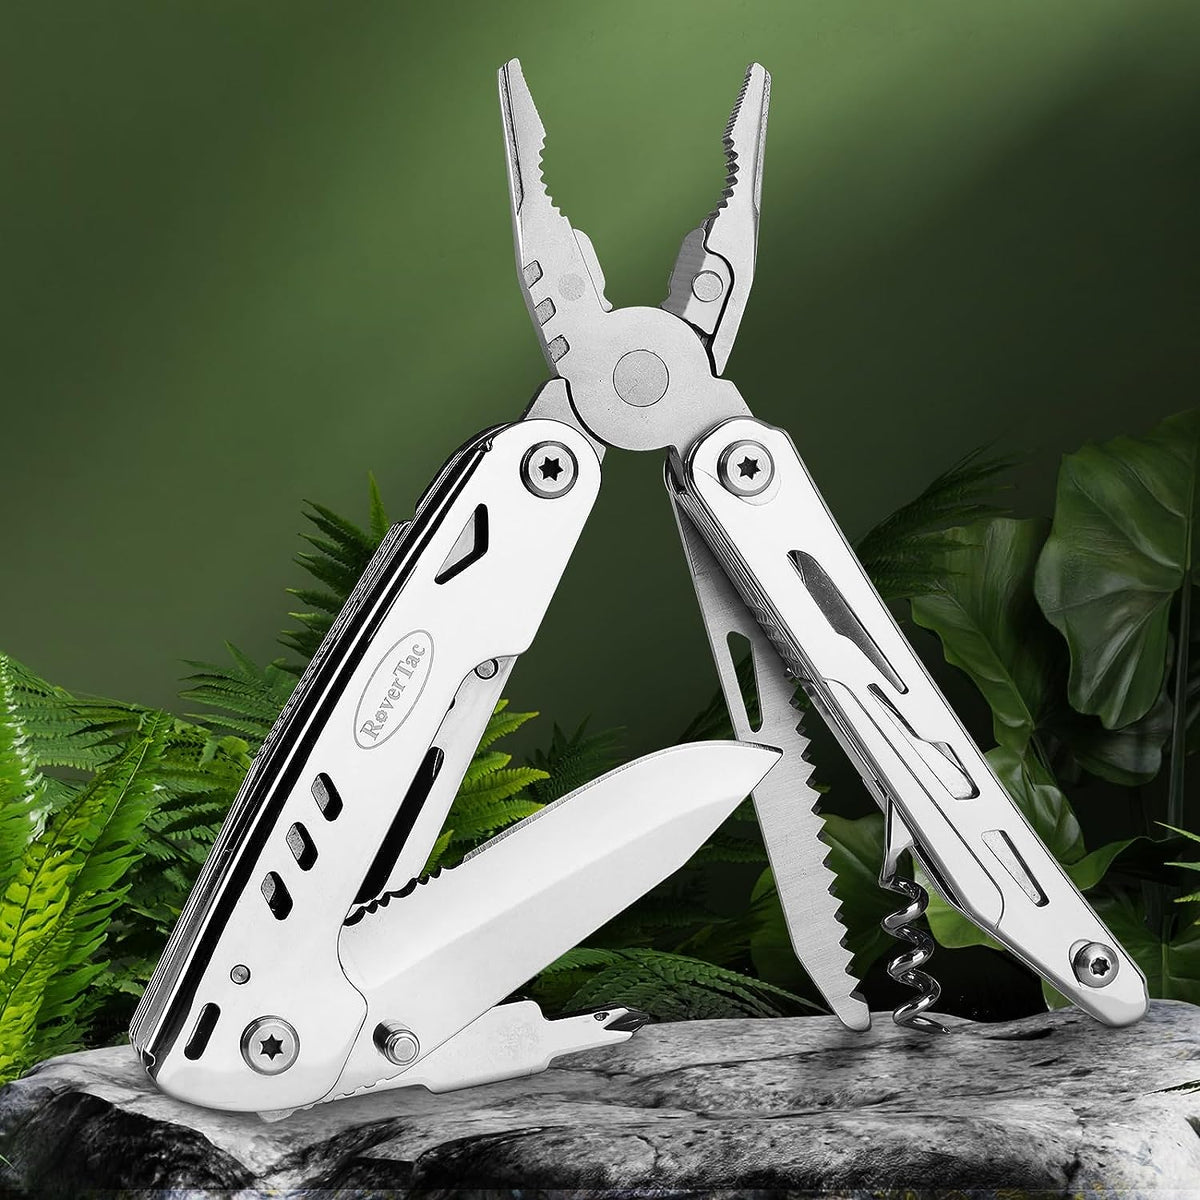 Multi Function Pocket Tools Chest Knife Stainless Steel with 11 features:  knife, saw, double jagged, scissors, bottle opener, can opener, the